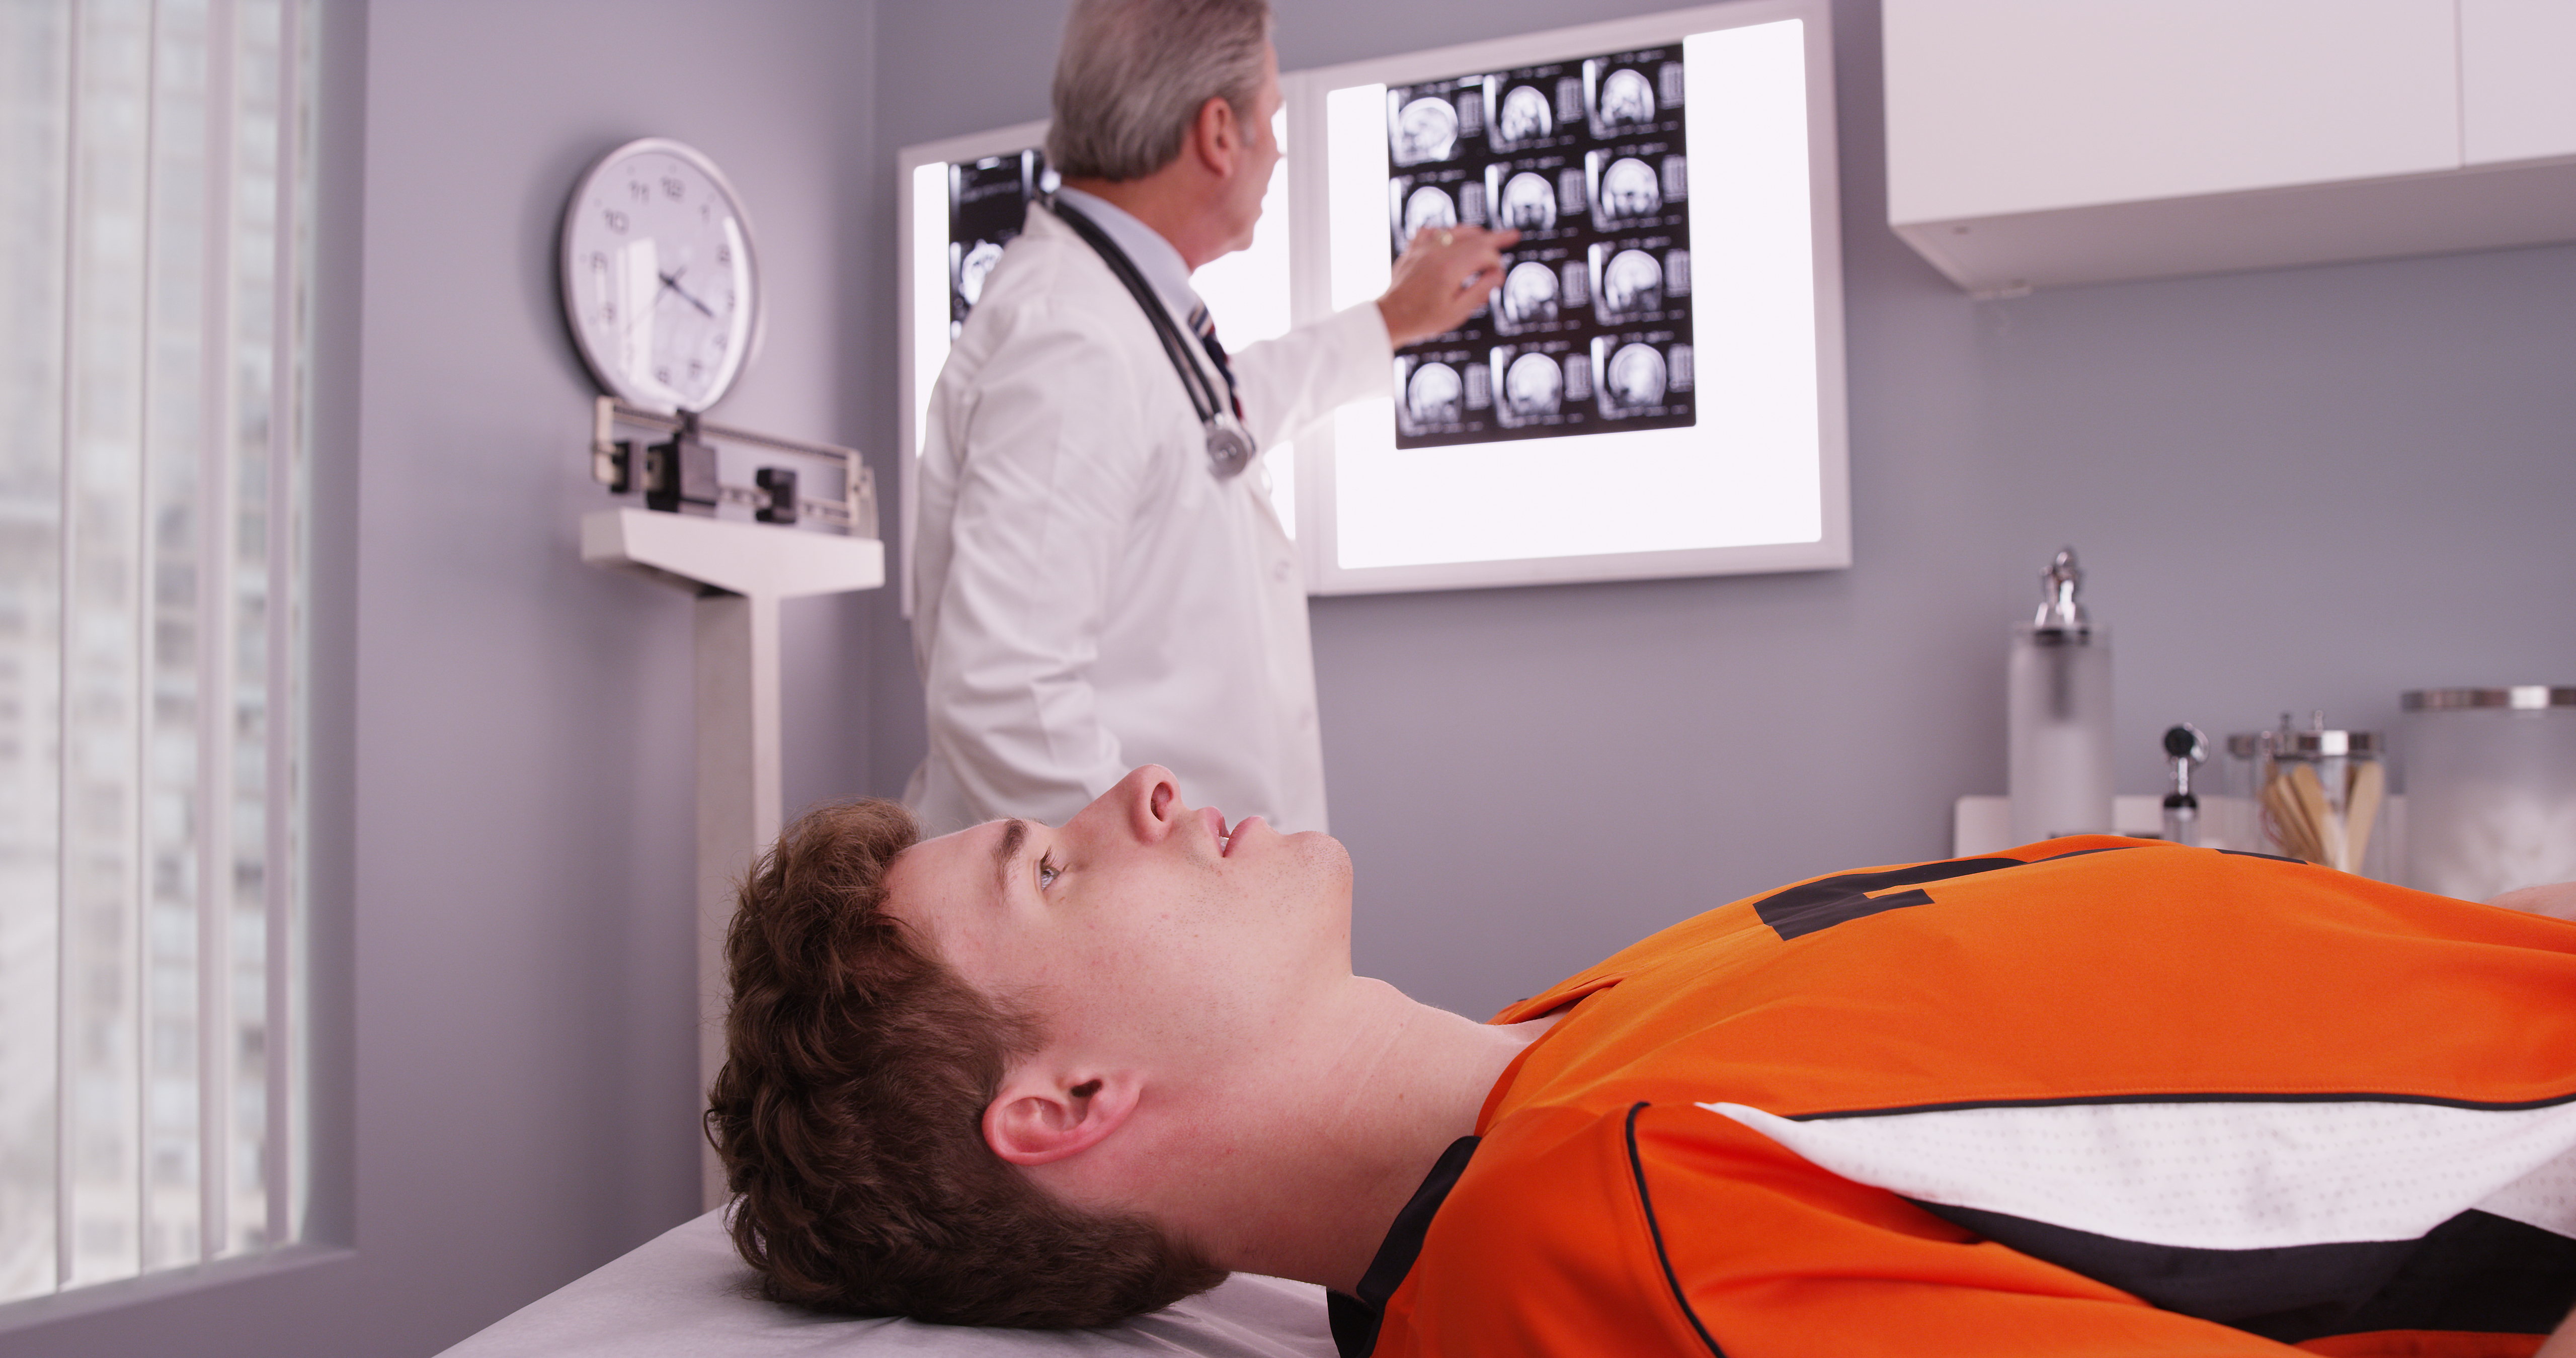 Pictured is a football player lyding down while a doctor reviews his x-rays. SHUTTERSTOCK/ Rocketclips, Inc. 